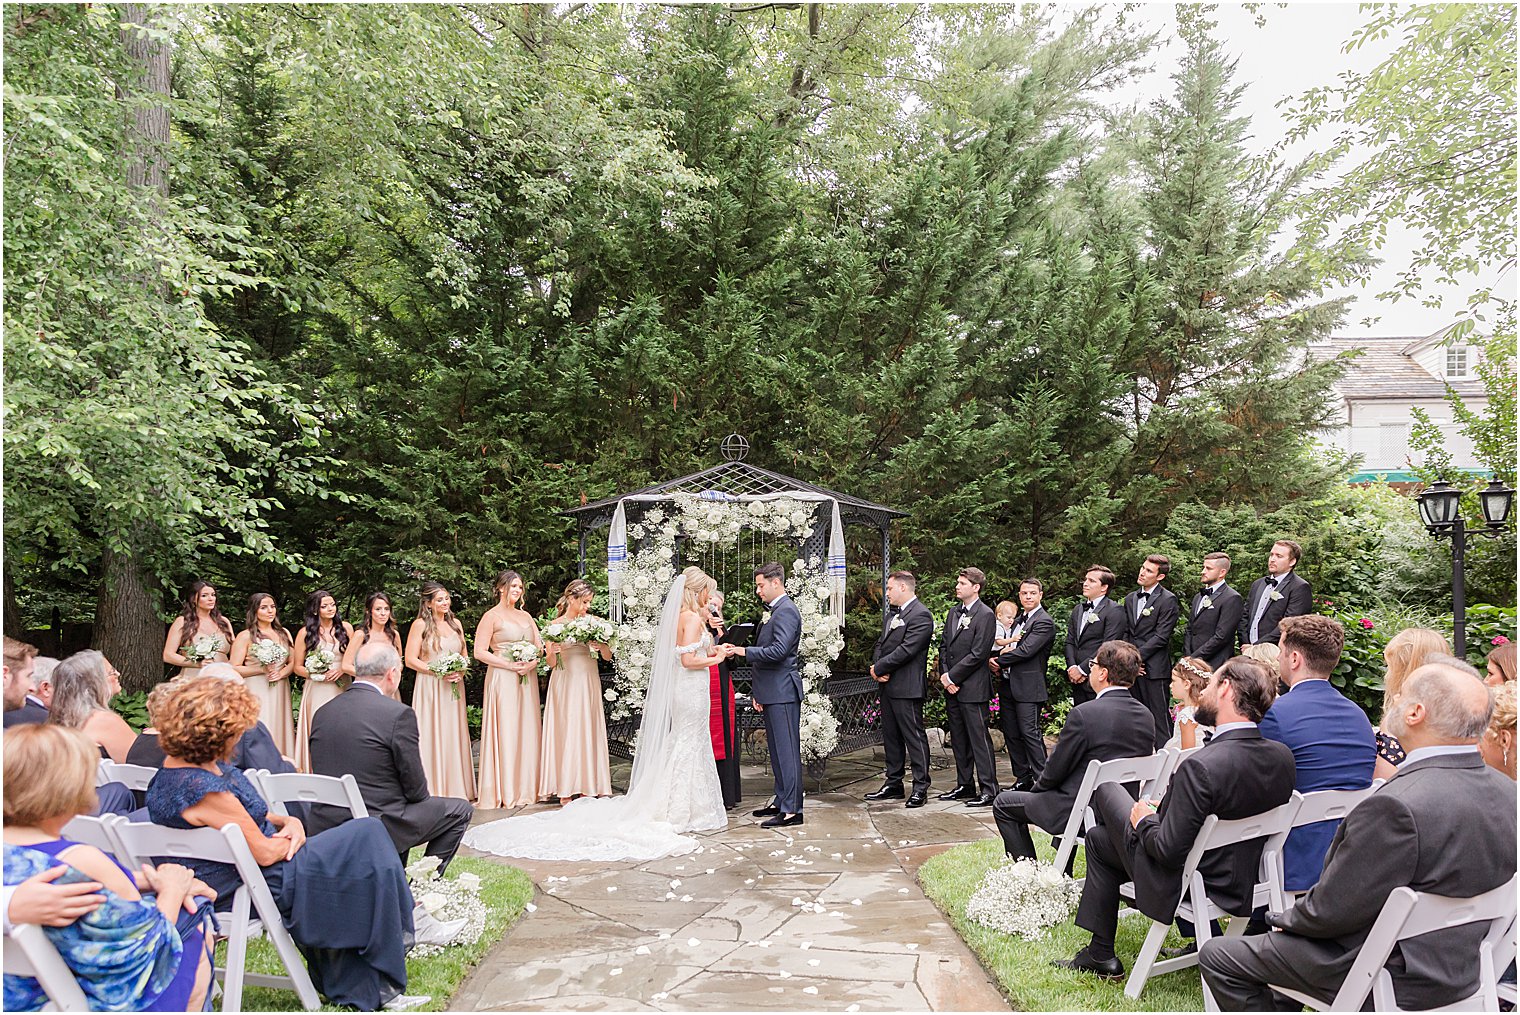 Jewish ceremony in the gardens of The English Manor